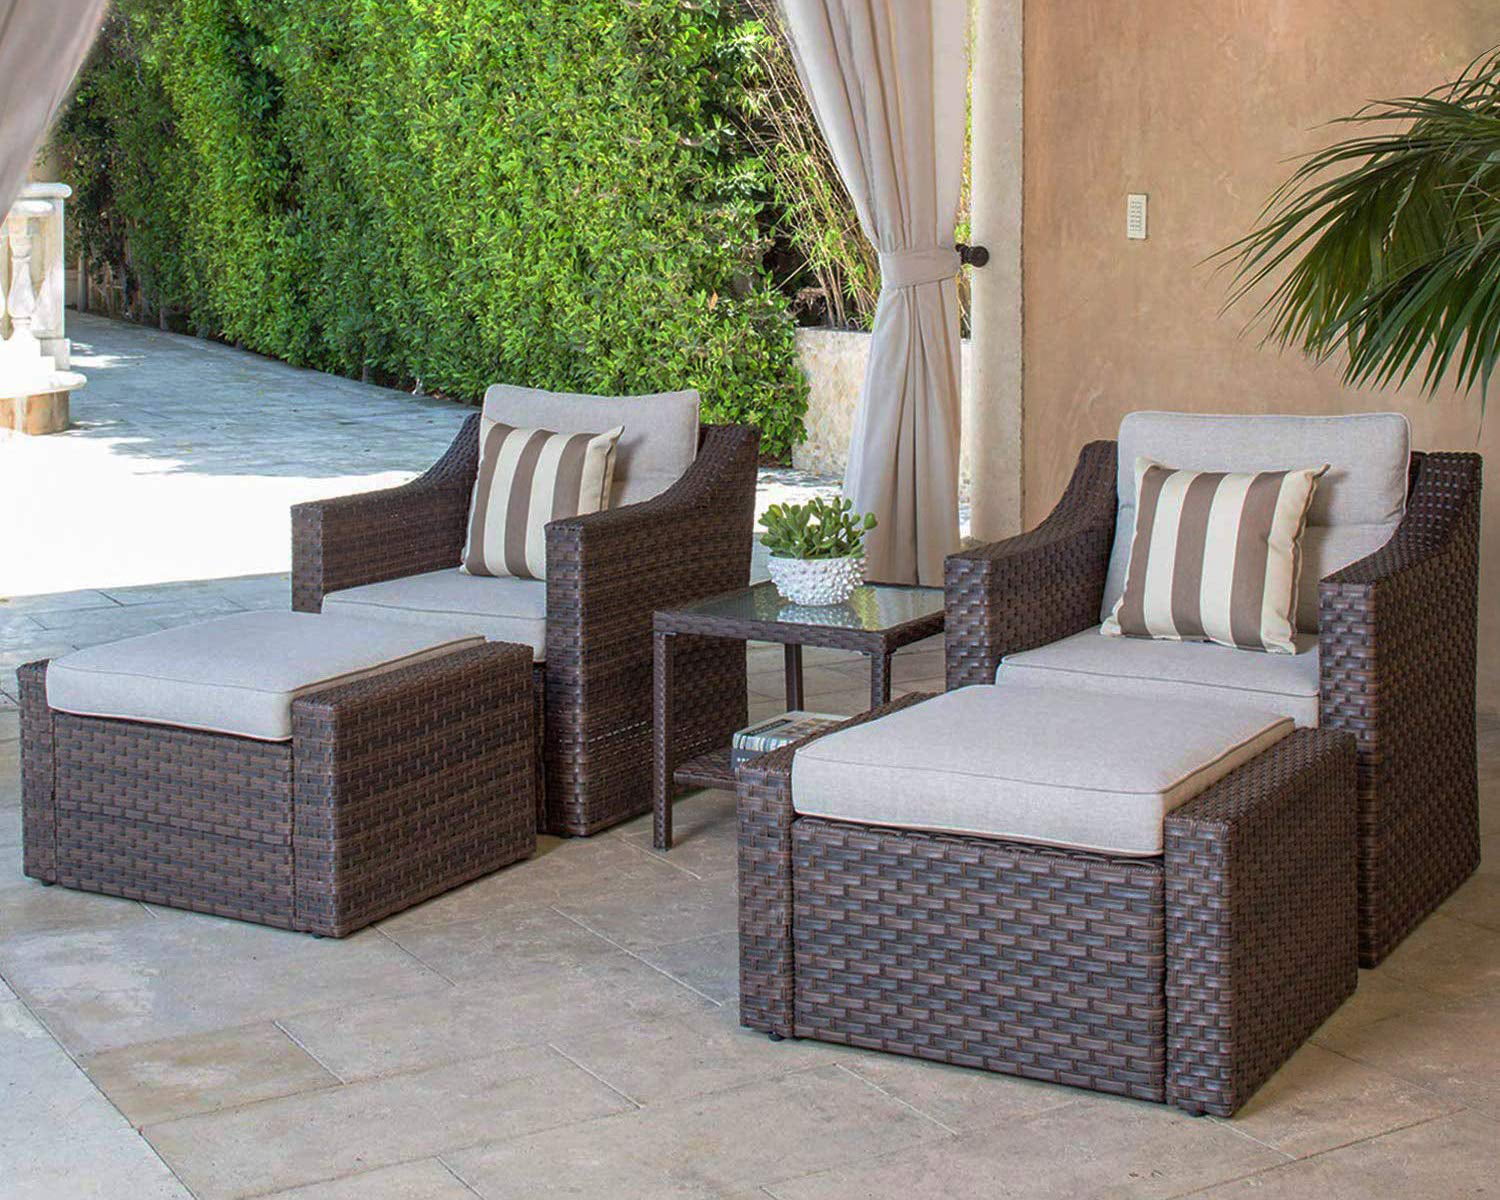 SUNCROWN 5PC Outdoor Wicker Sofa Seating Set with Table, Chairs and